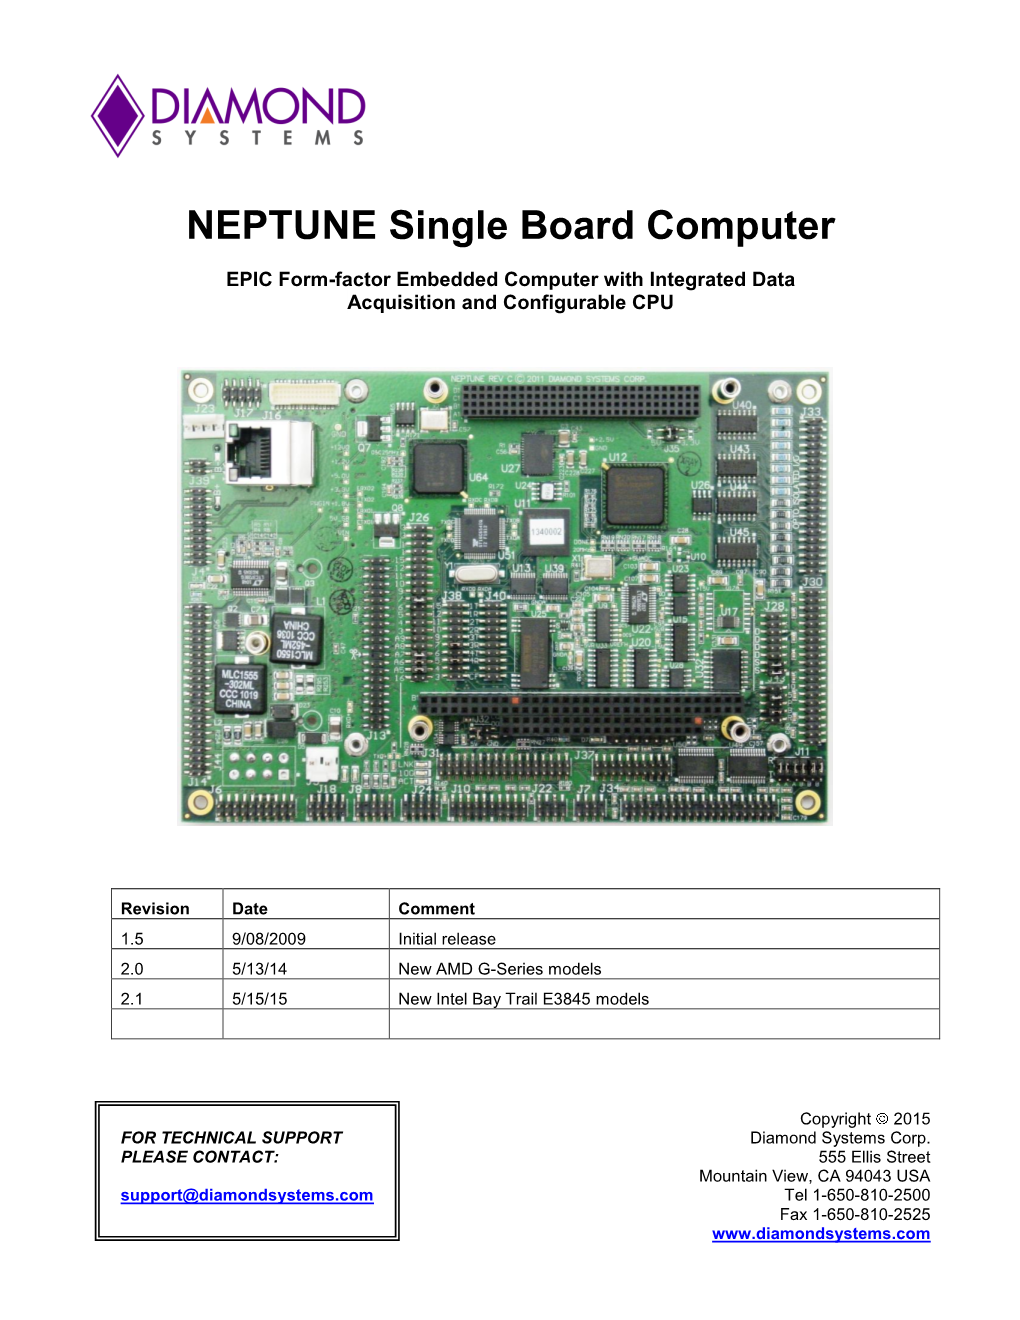 Neptune User Manual 2.1 Page 2